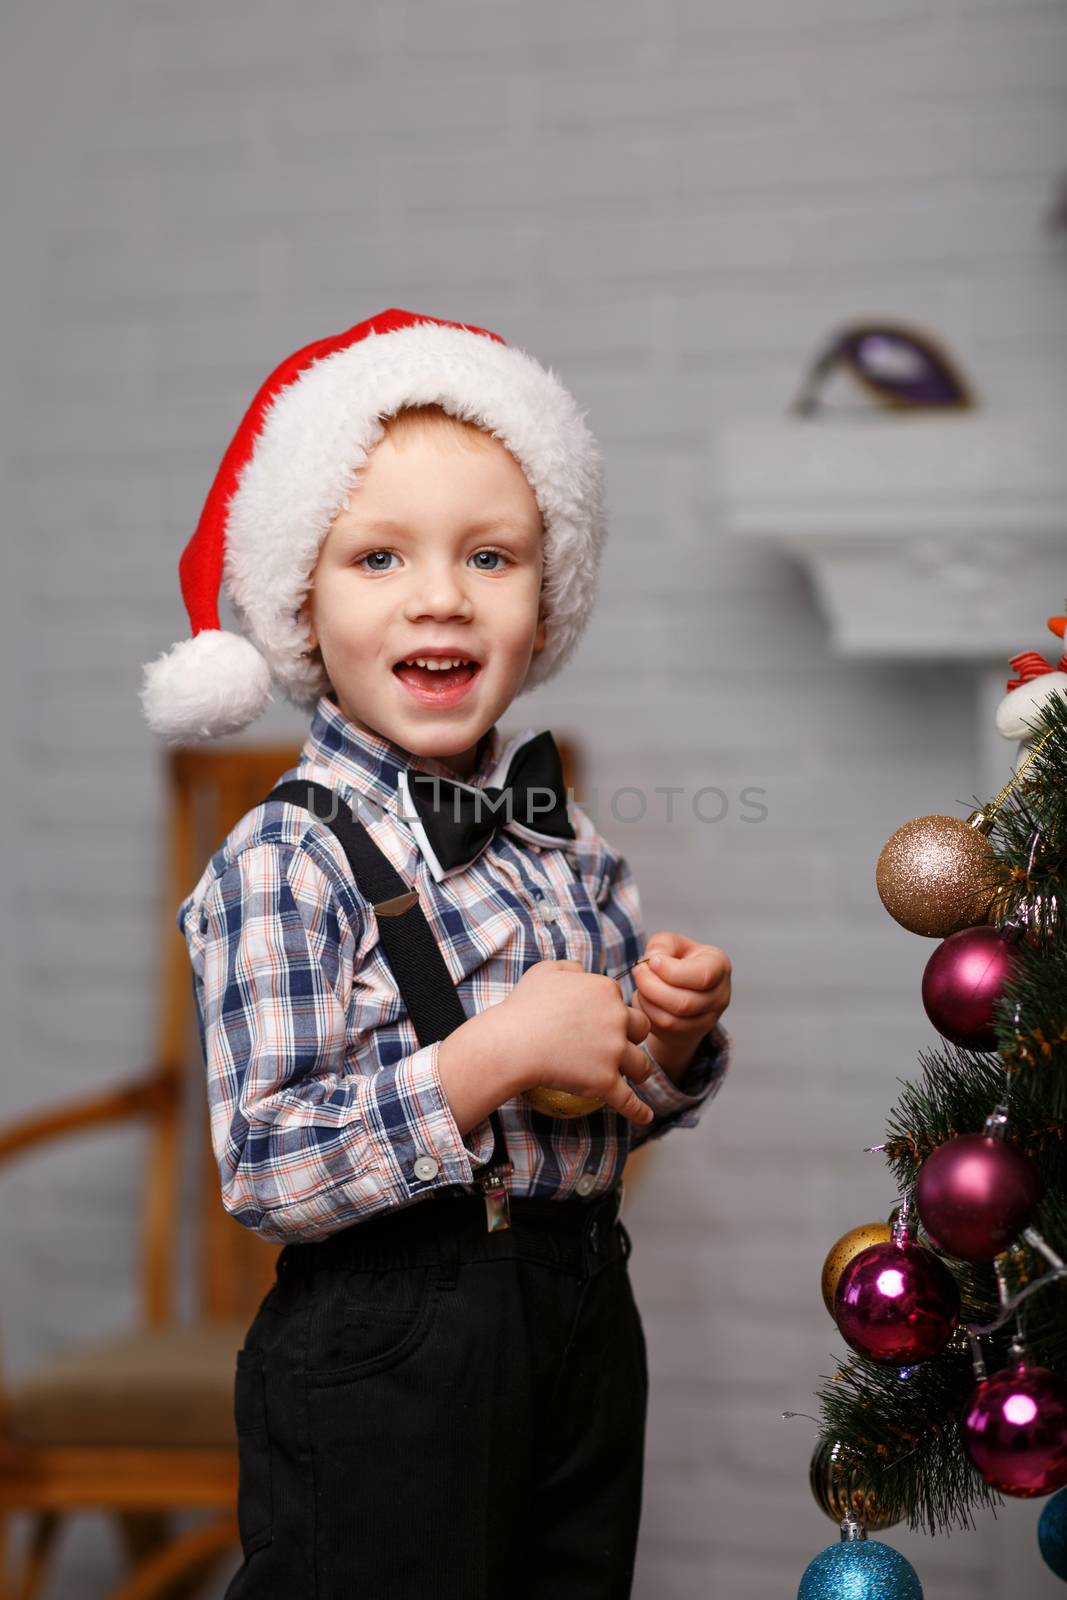 Cute little boy decorates a Christmas tree in the interior with Christmas decorations